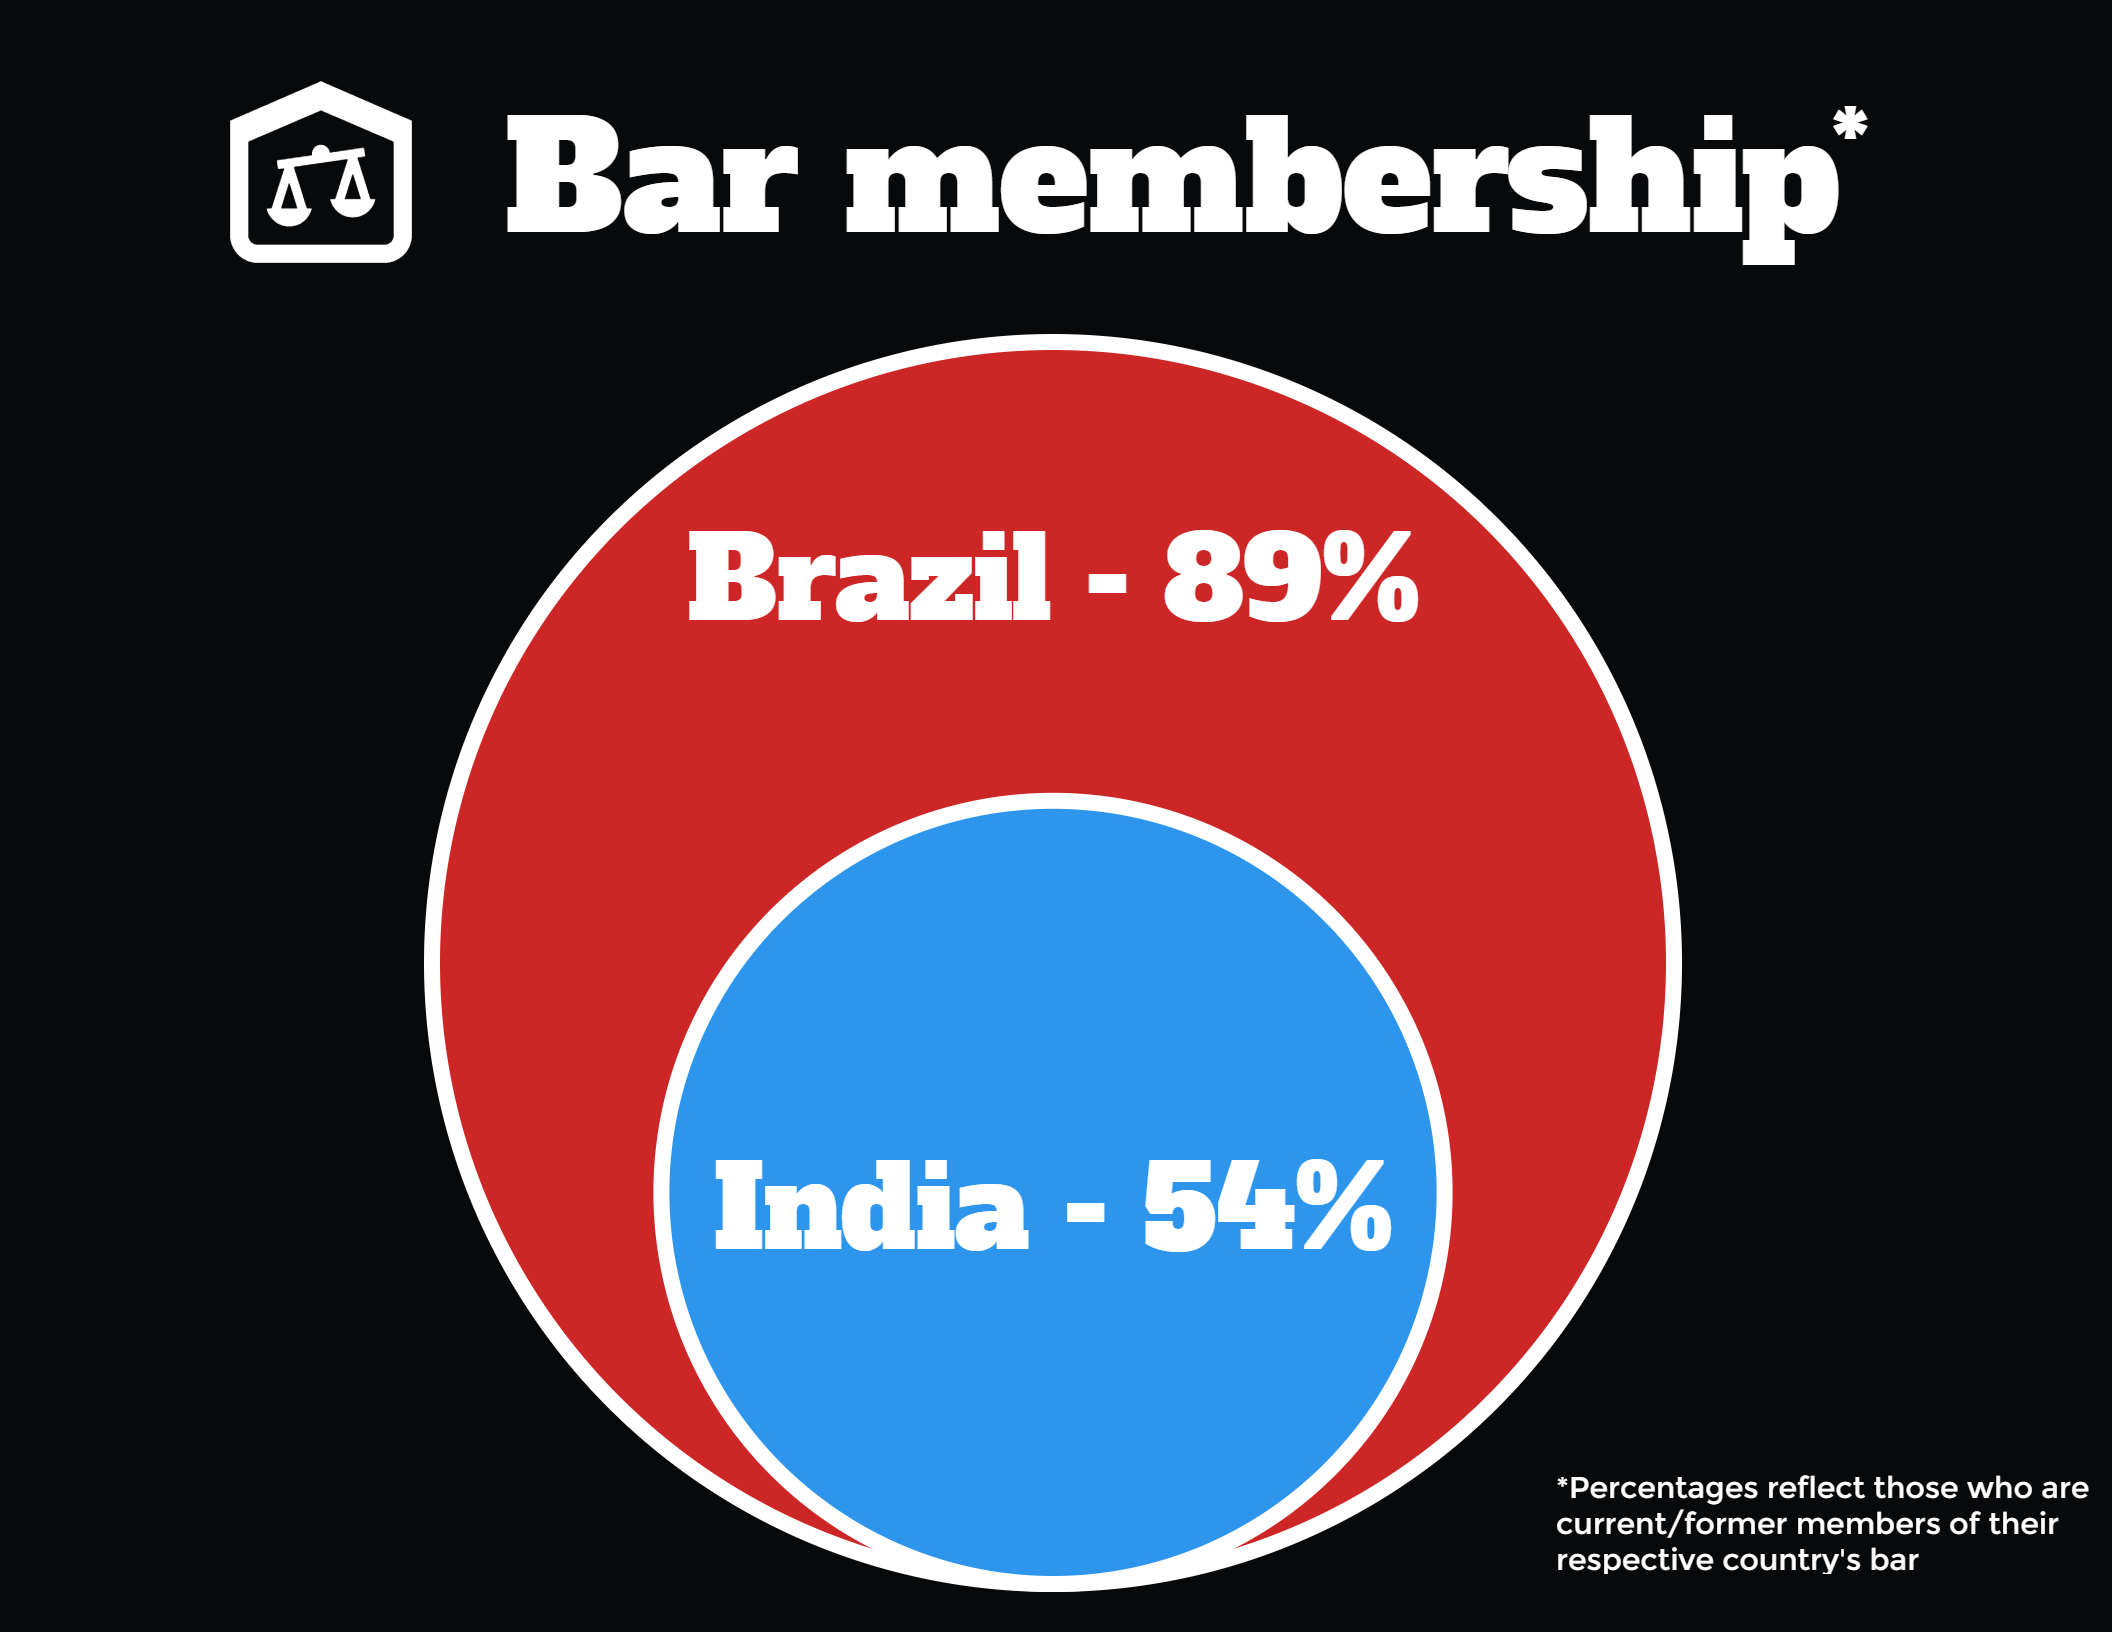 Percentage of bar membership in India and Brazil.